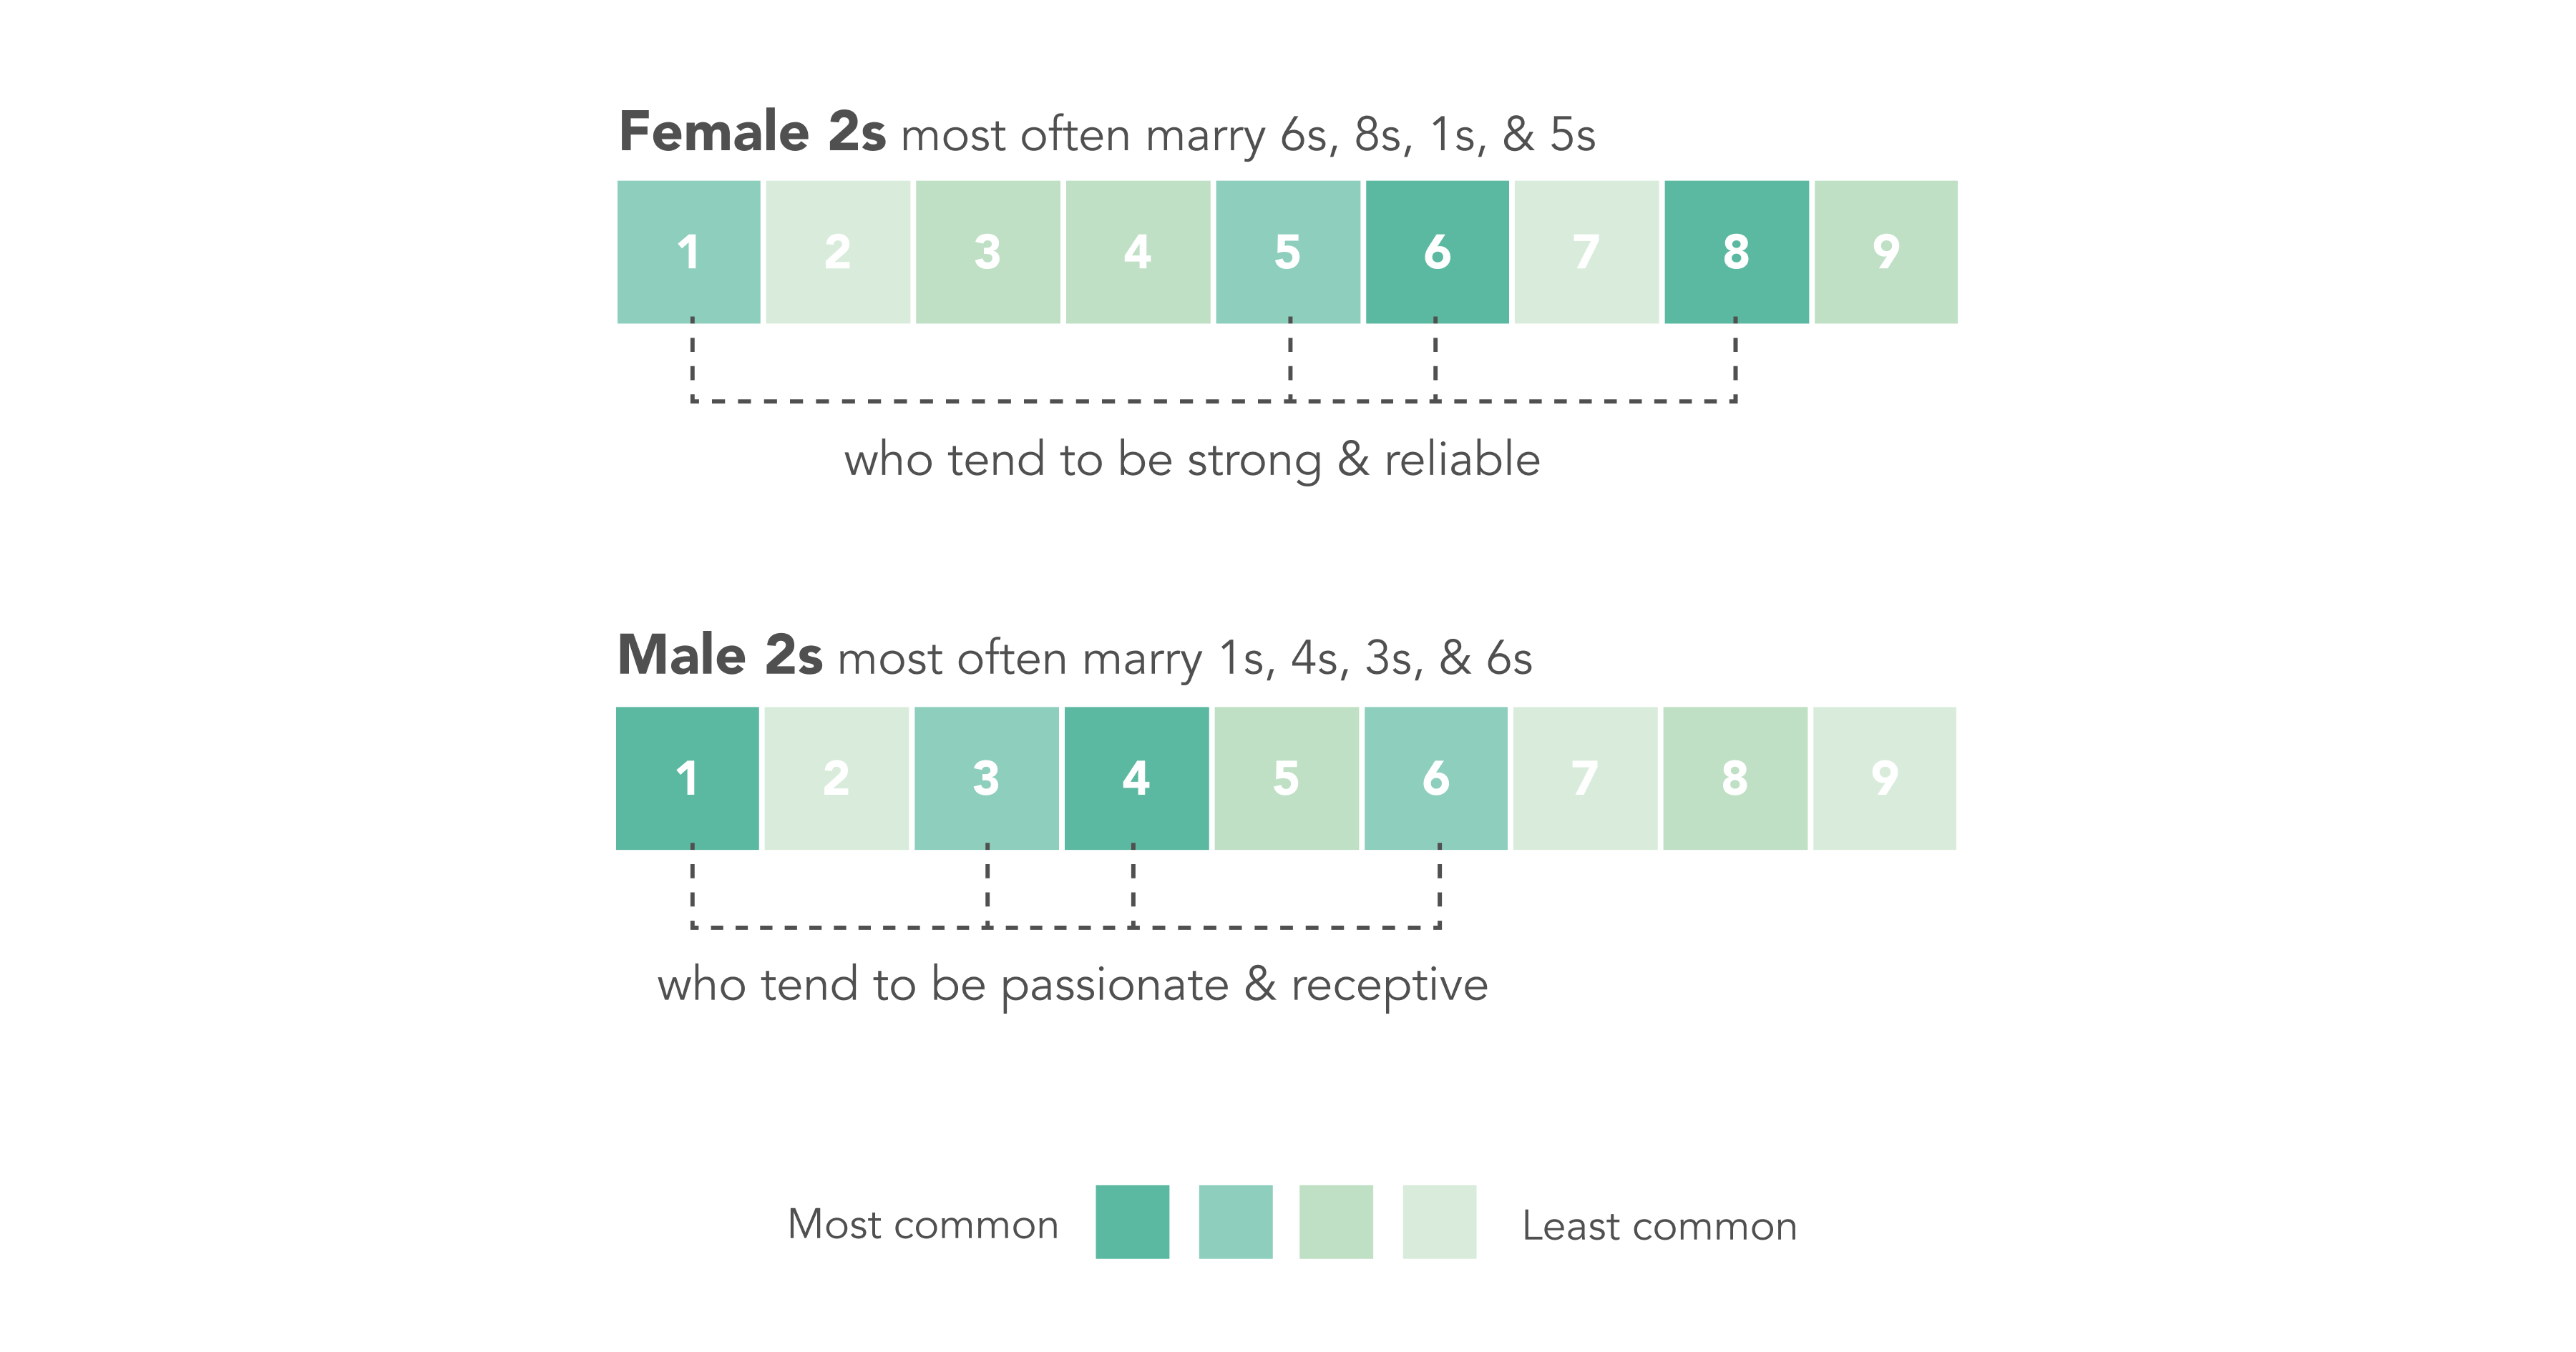 Female 2s most often marrying 6s, 8s, 1s, and 5s, and Male 2s most often marrying 1s, 4s, 3s, and 6s (in that order)